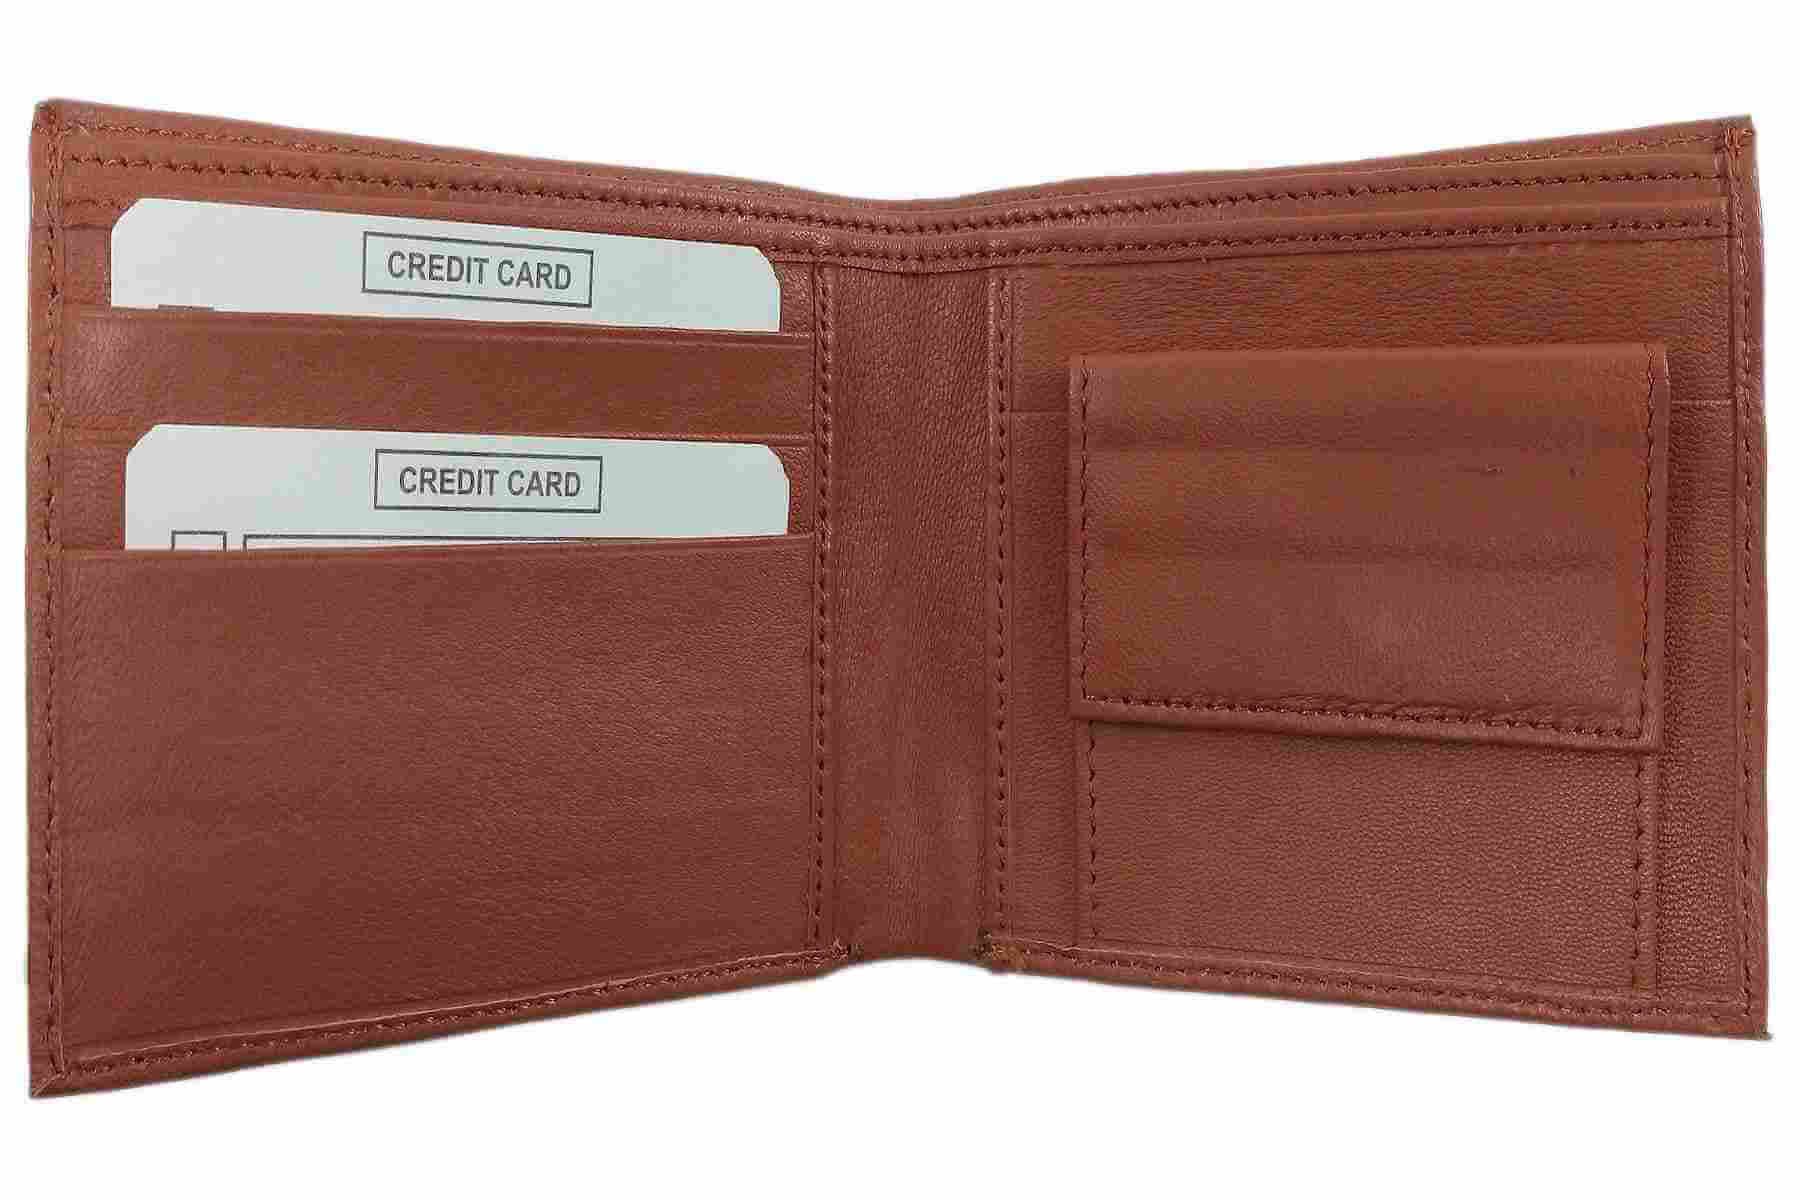 Ladies And Gents Wallet Gift Set: Stylish Choices For Him And Her